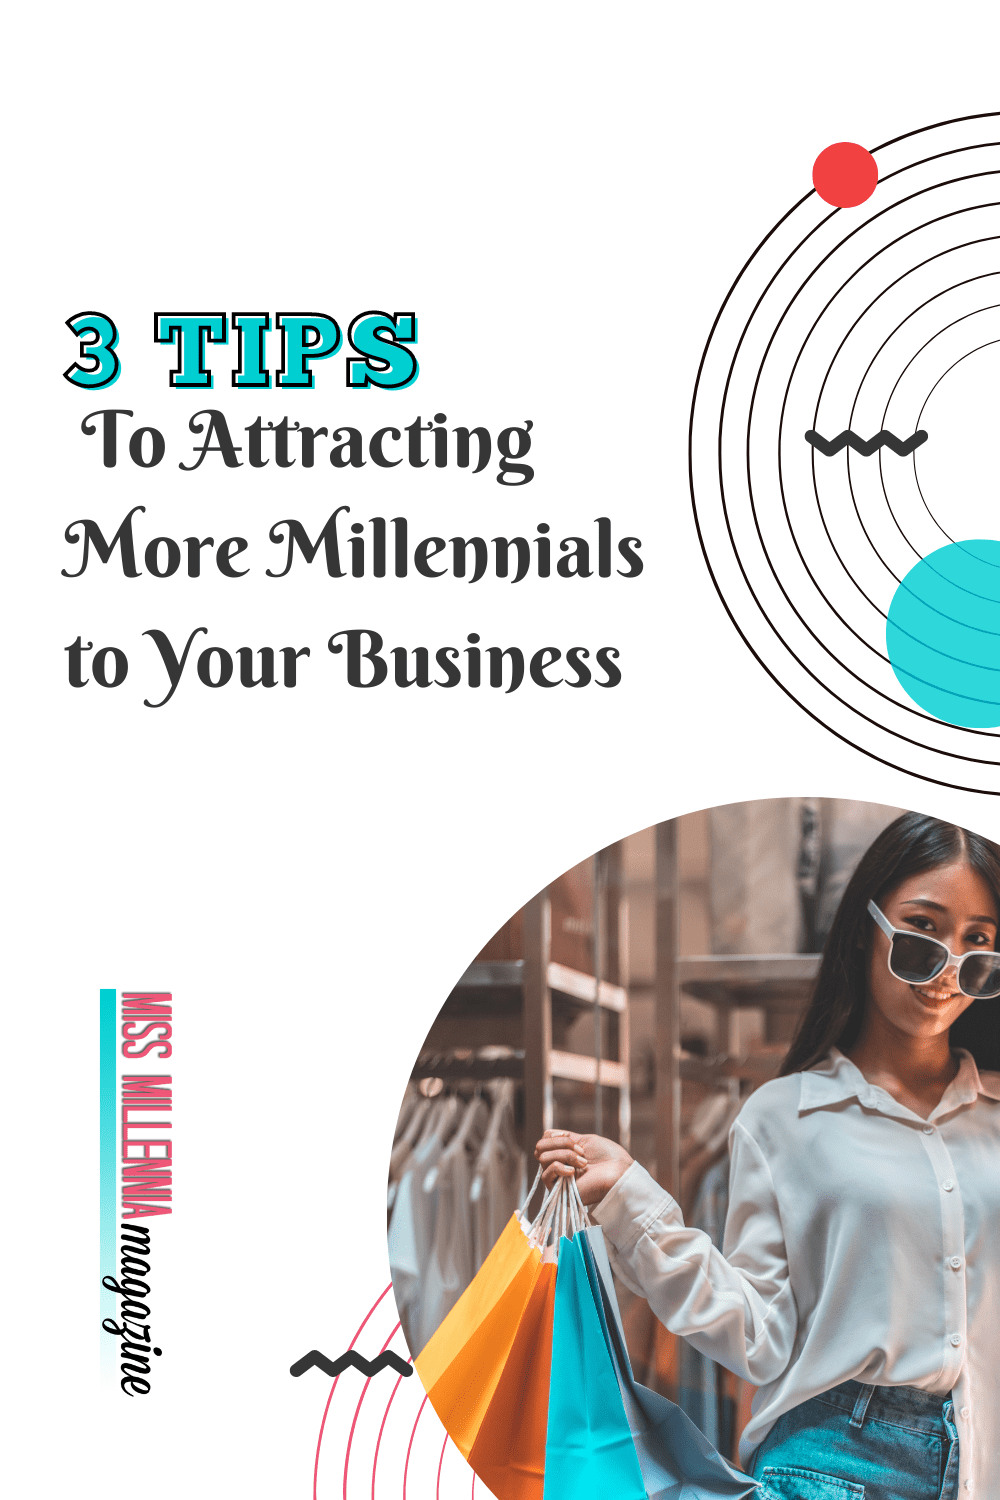 3 Tips to Attracting More Millennials to Your Business